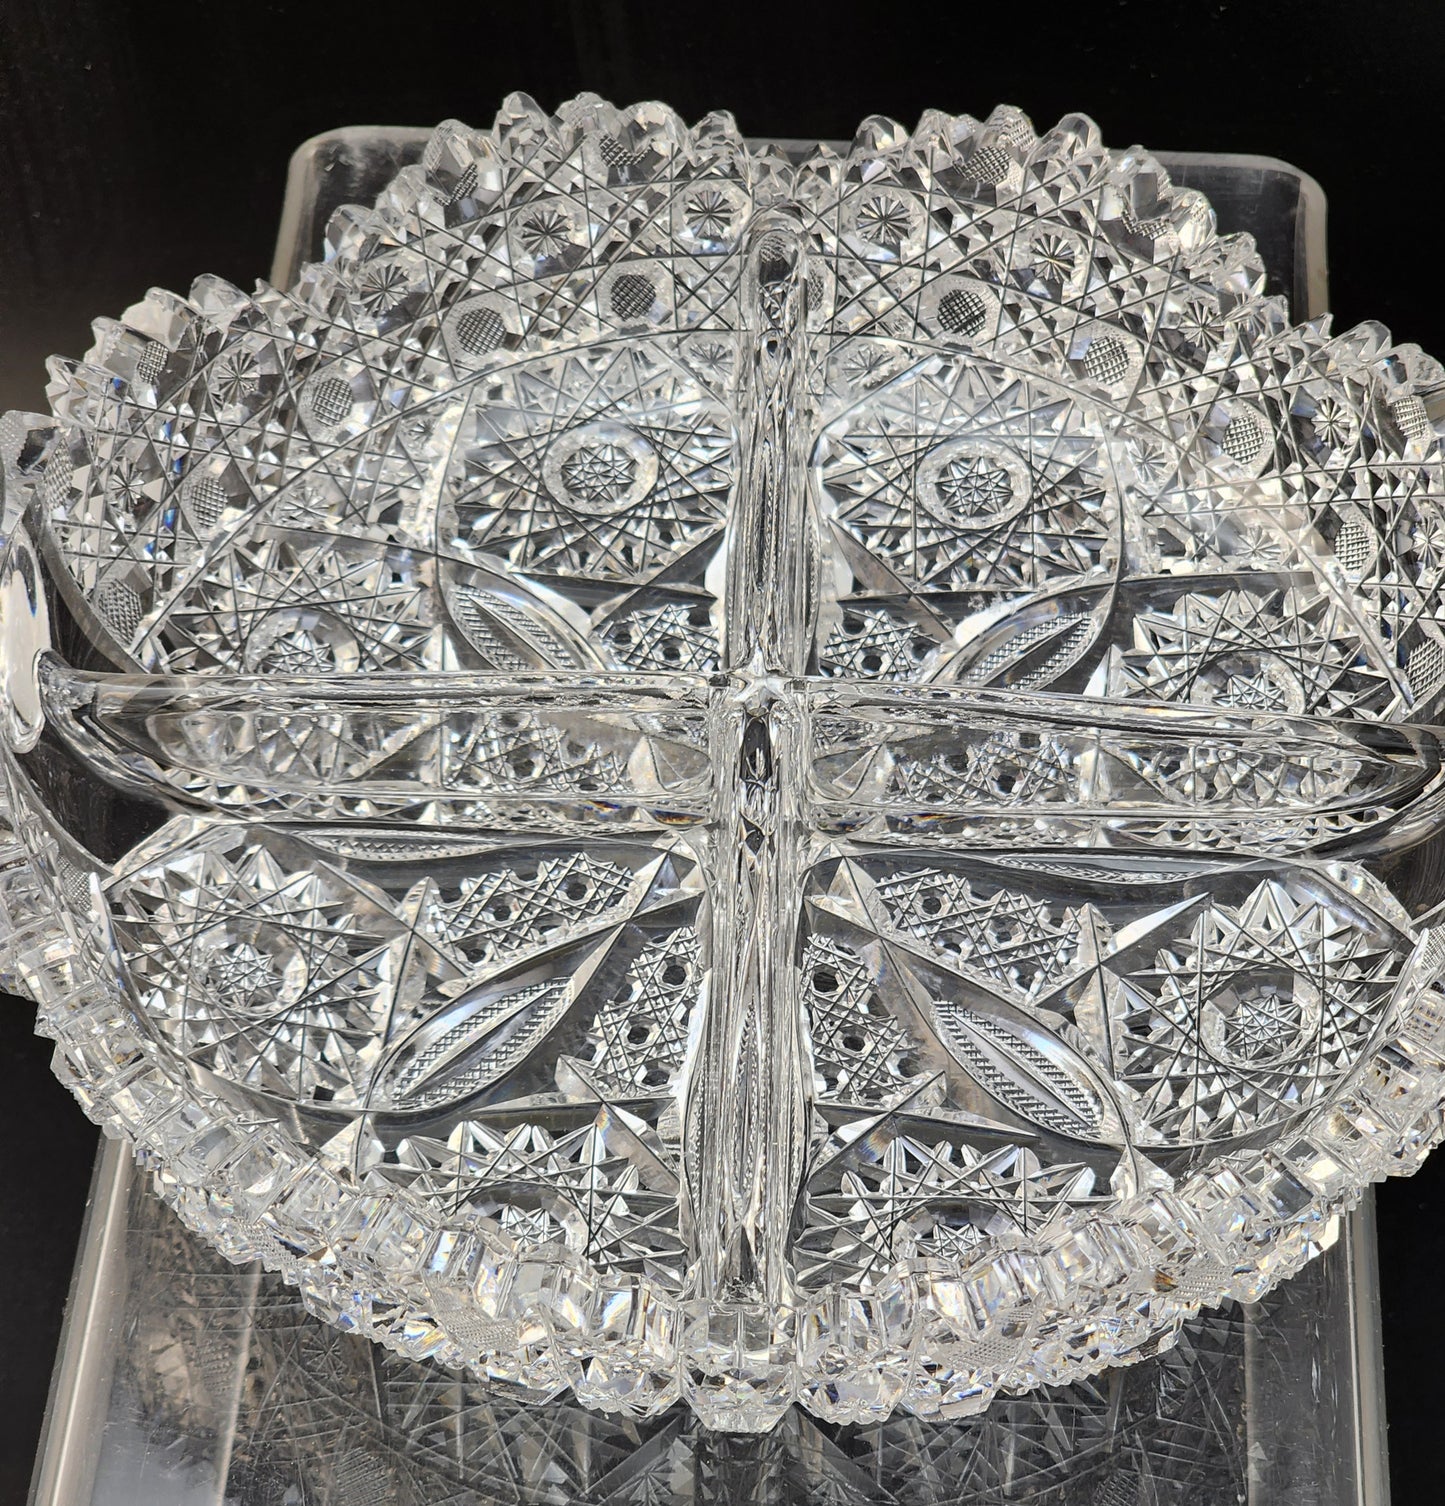 ABP cut glass 4 section handled dish antique crystal